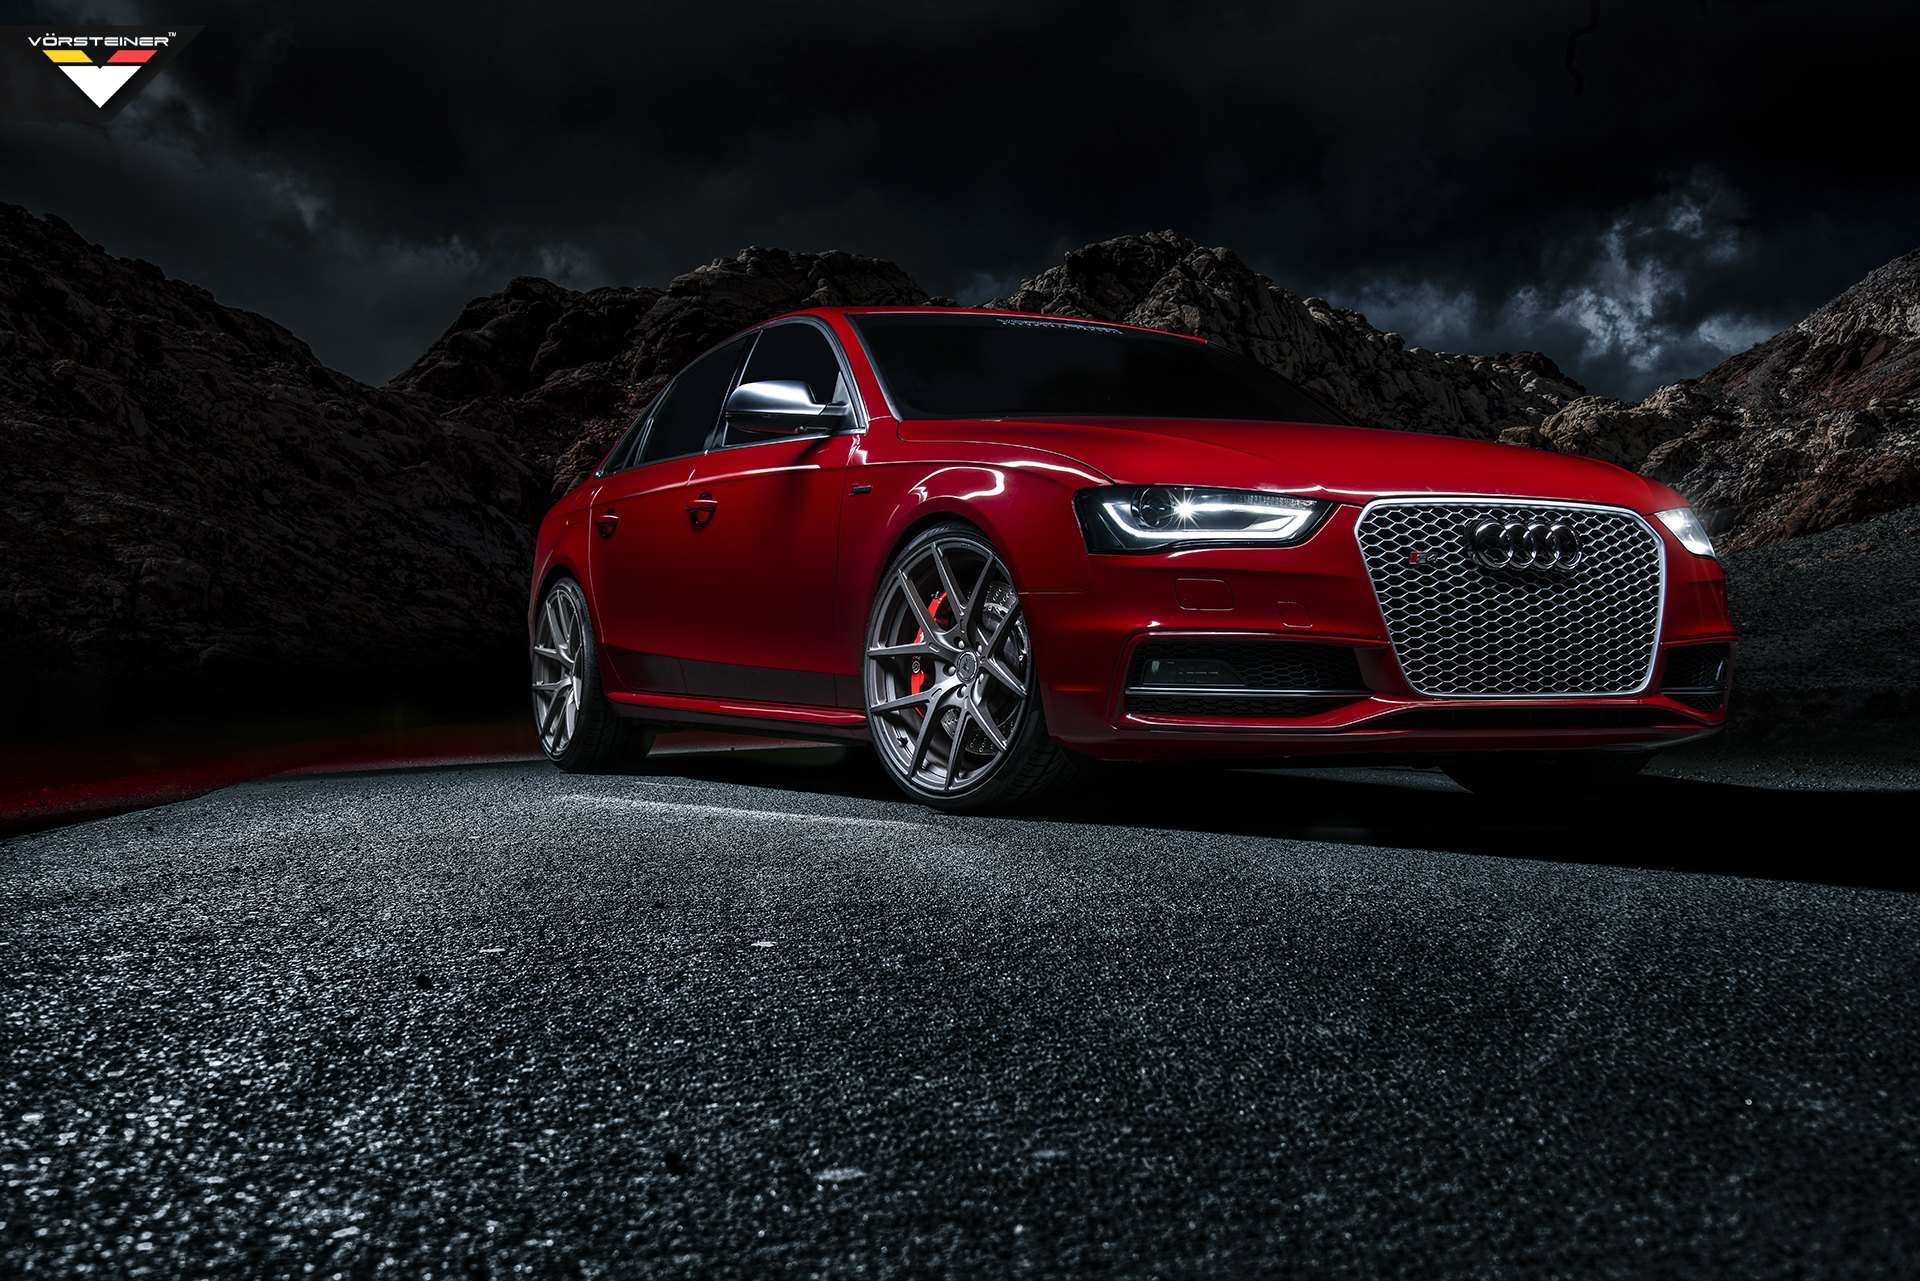 Chrome Mesh Grille on Red Audi S4 - Photo by Vorstiner